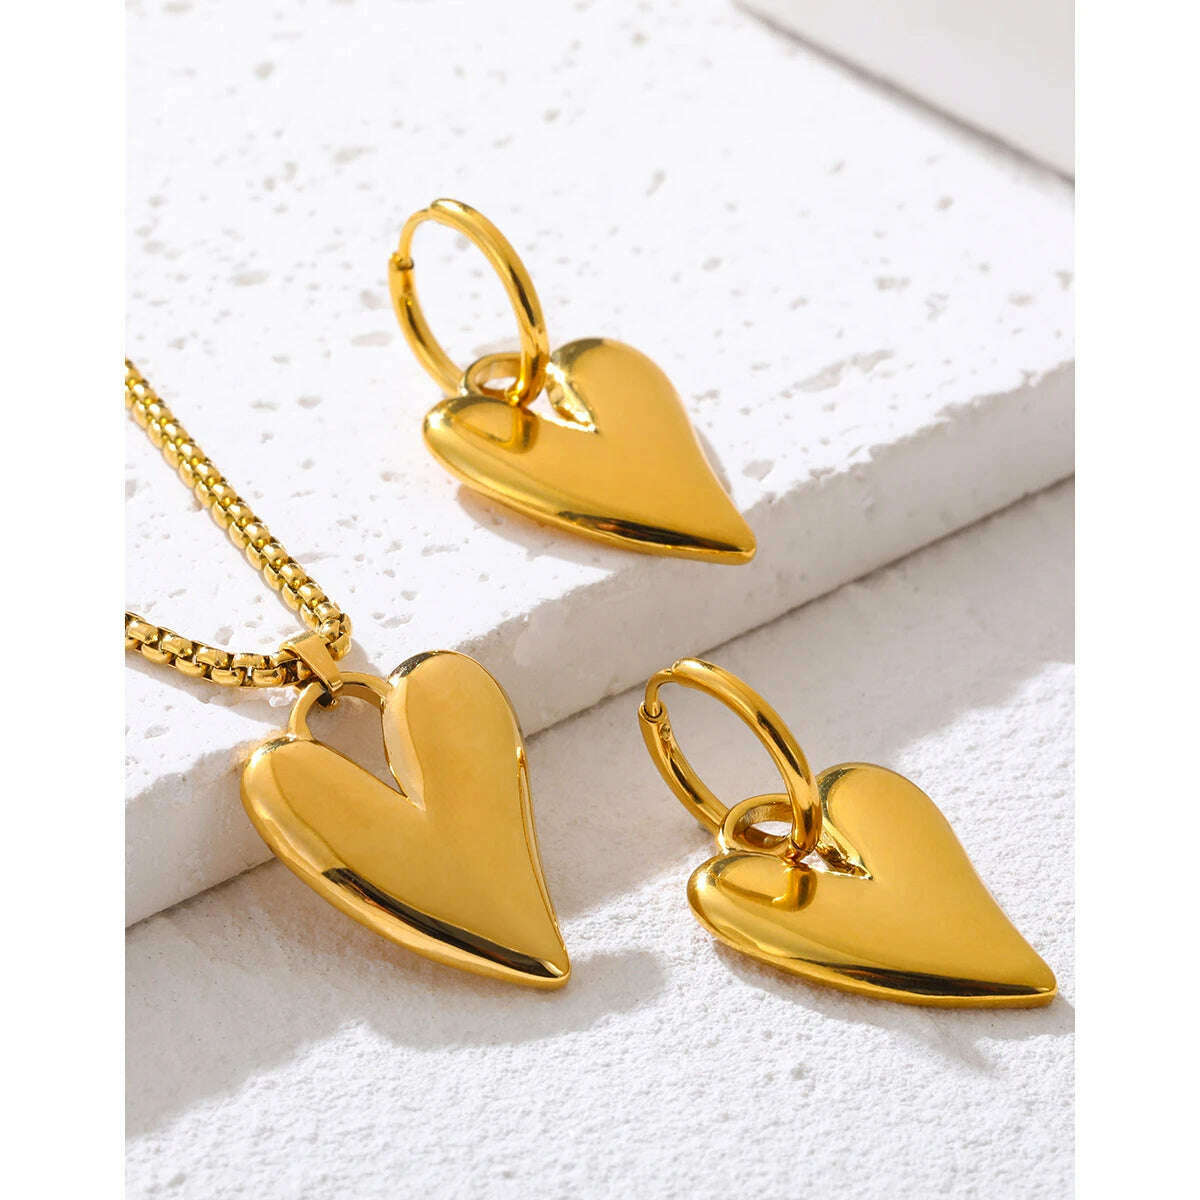 KIMLUD, YACHAN 18K Gold Plated Stainless Steel Irregular Heart Necklace Earrings for Women Glossy Chic Waterproof Jewelry Set, KIMLUD Women's Clothes